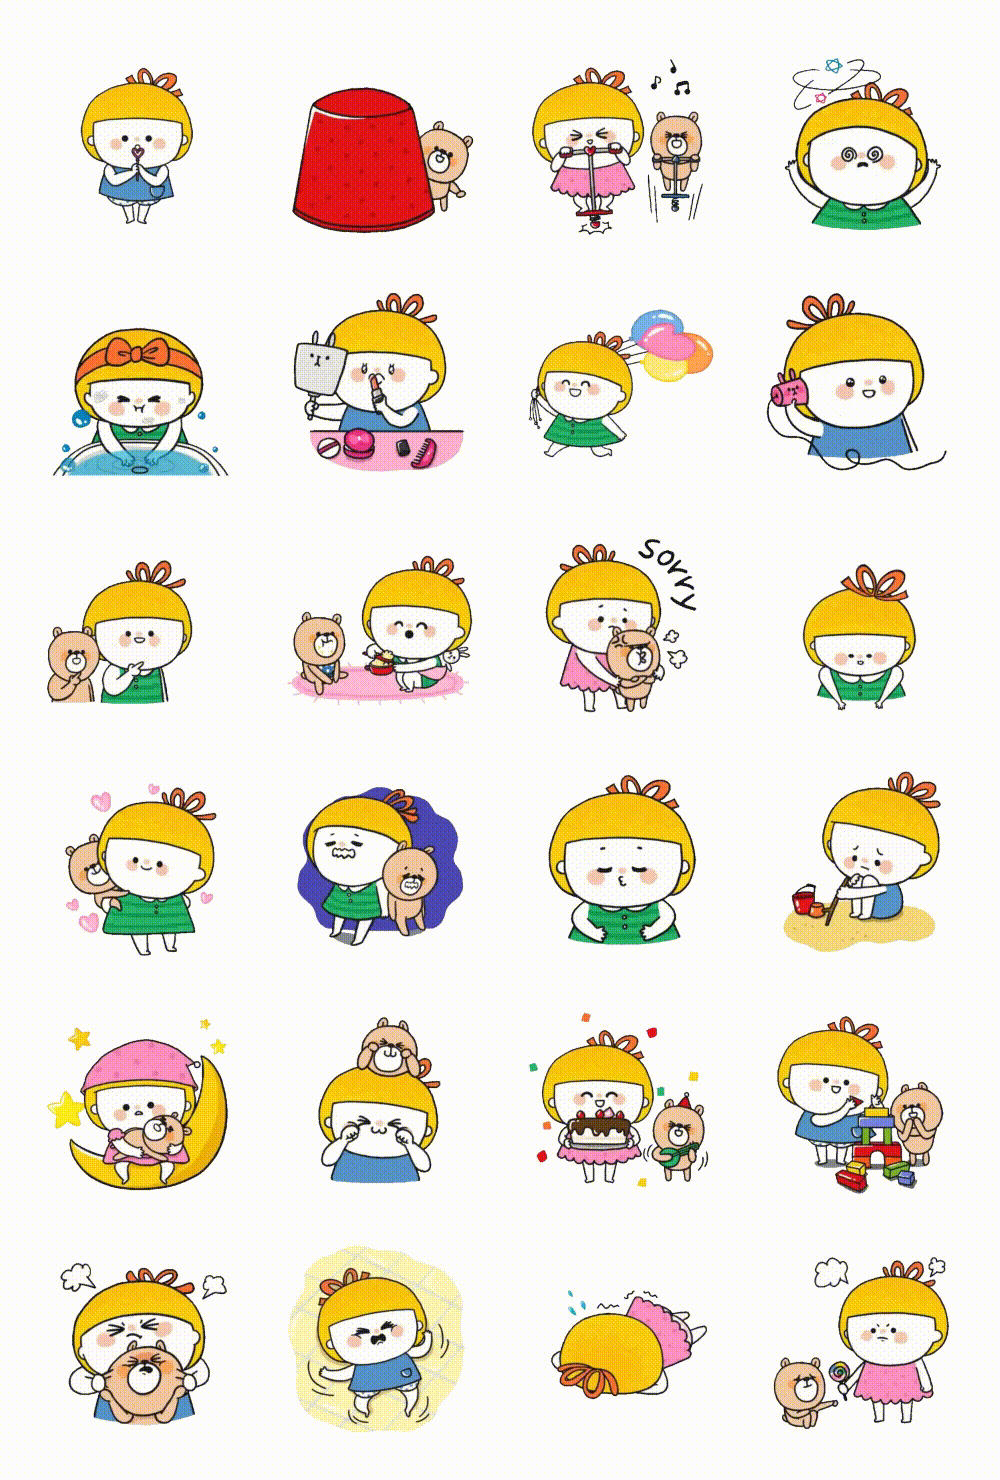 Let's play with Aya! Animation/Cartoon,People,Culture sticker pack for Whatsapp, Telegram, Signal, and others chatting and message apps